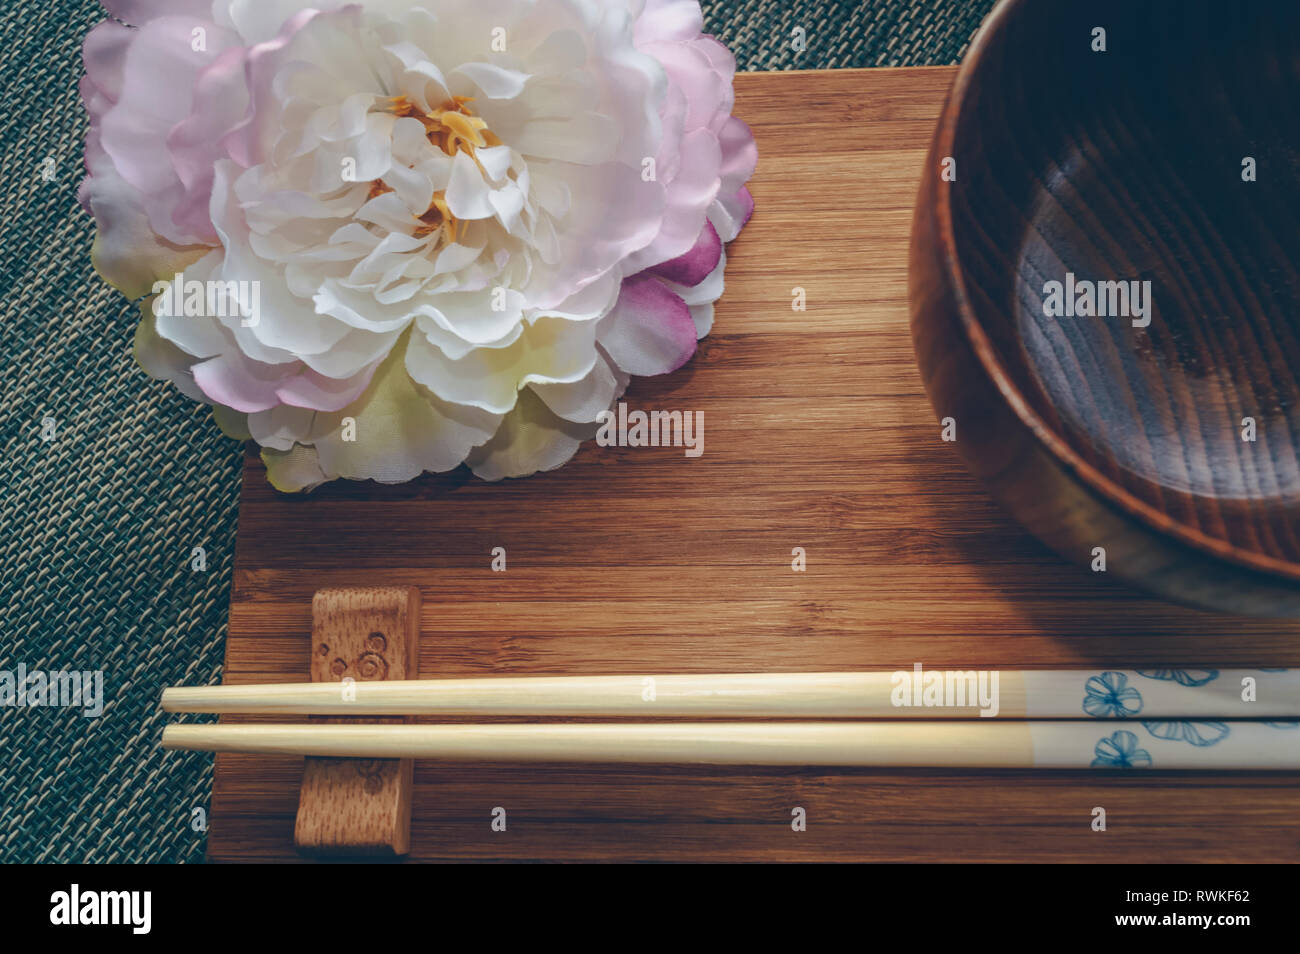 close up view of japanese styled tablewear and peony flower decor Stock Photo